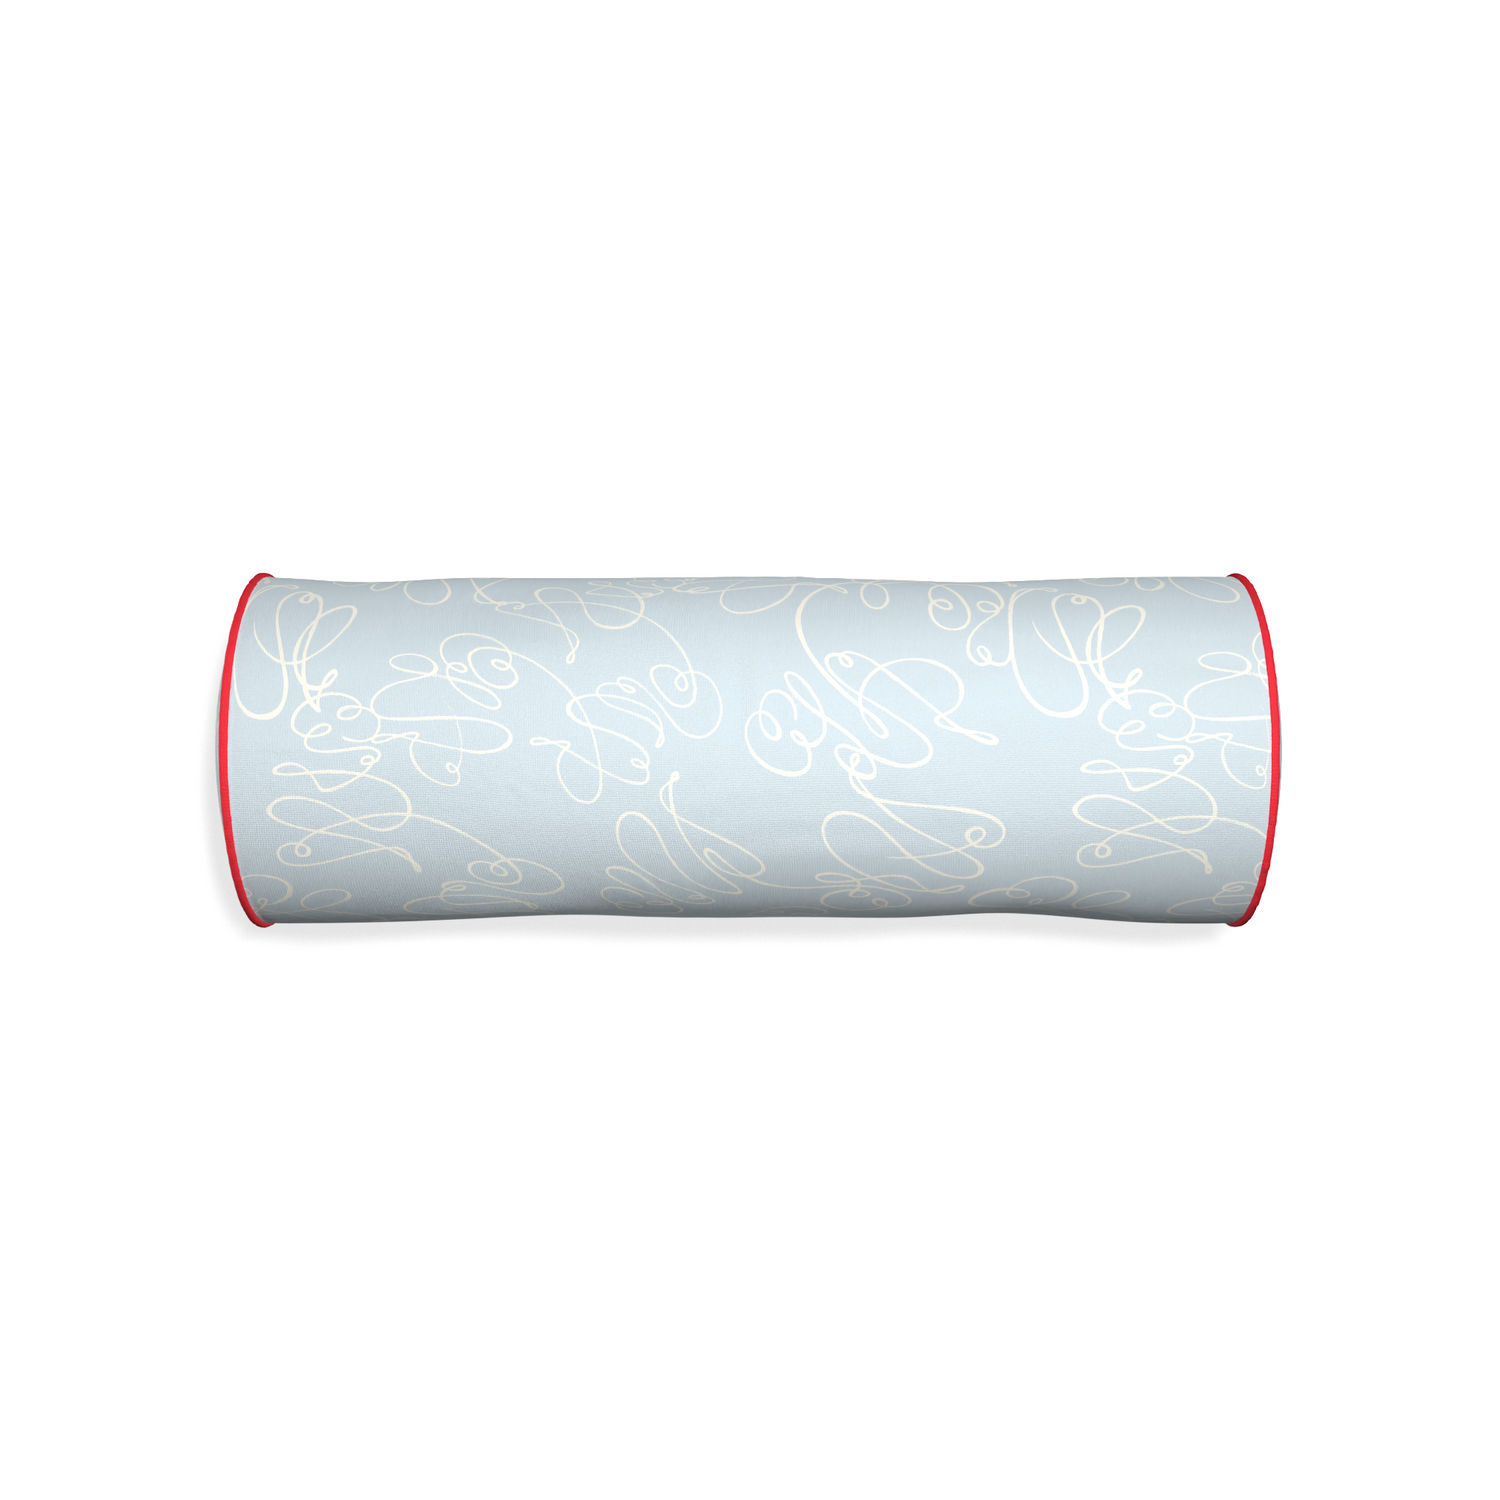 Bolster mirabella custom pillow with cherry piping on white background